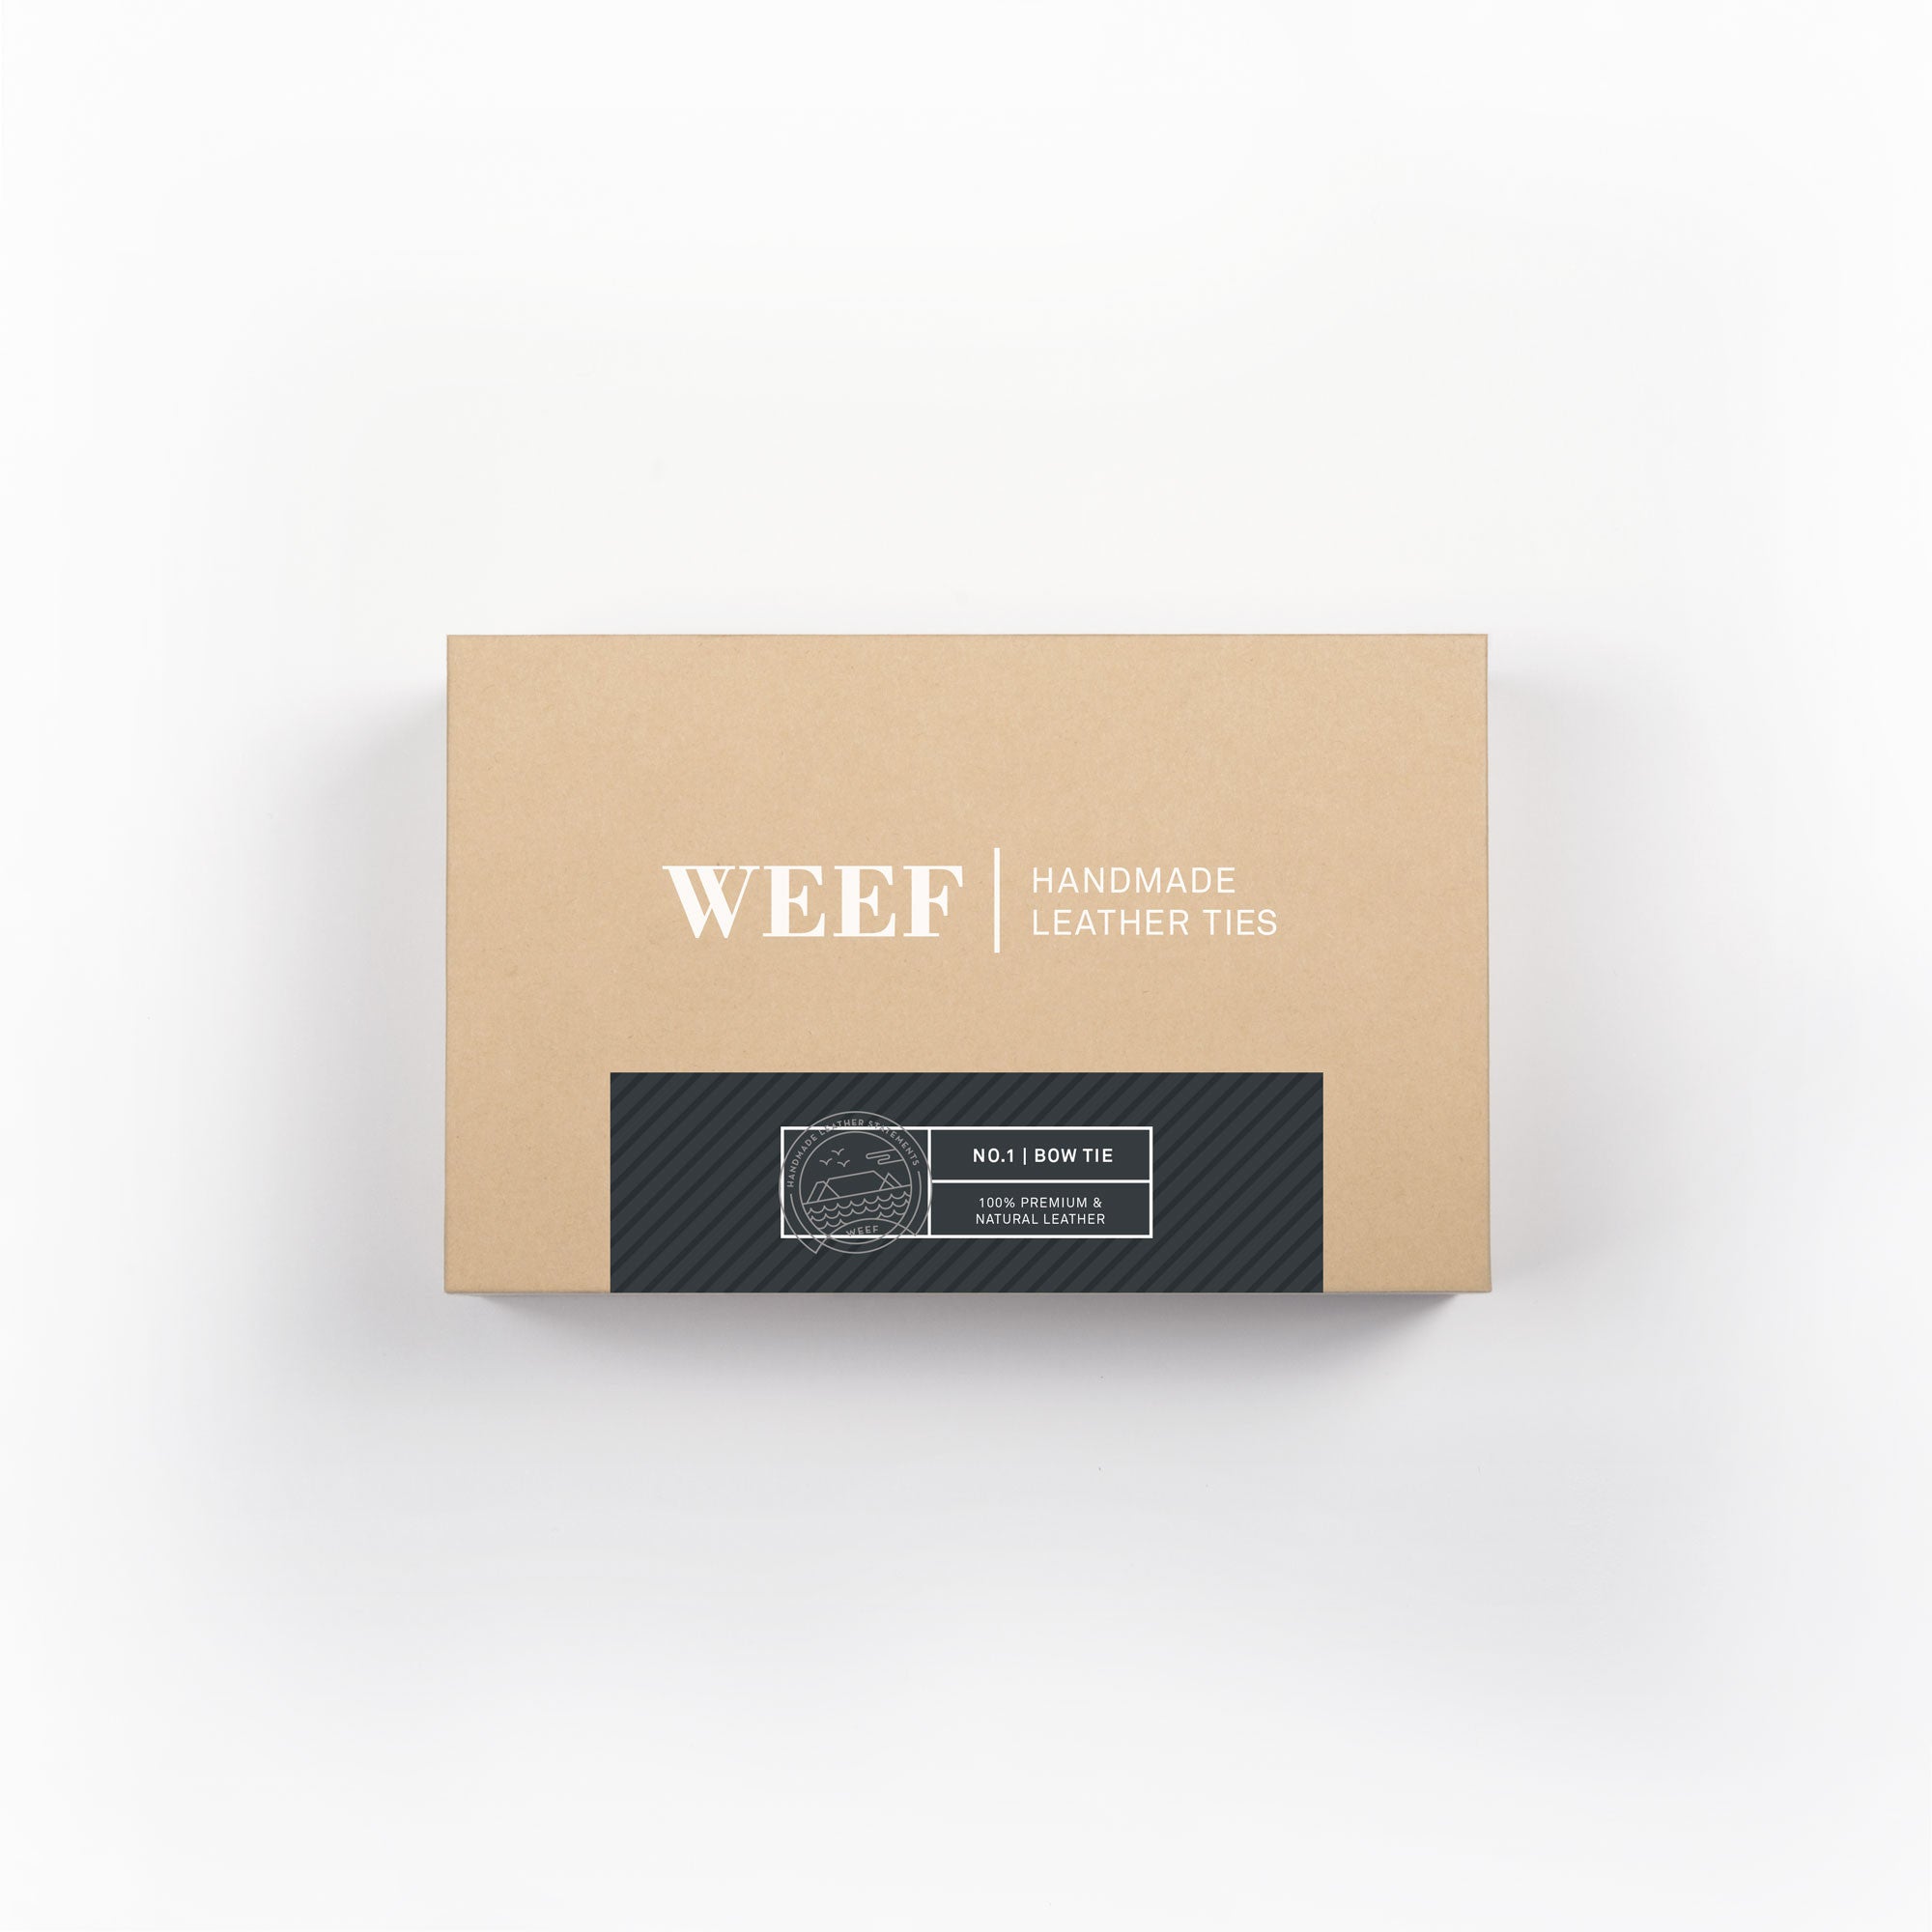 This is the premium packaging box of the pepper grey WEEF handmade leather bow tie.